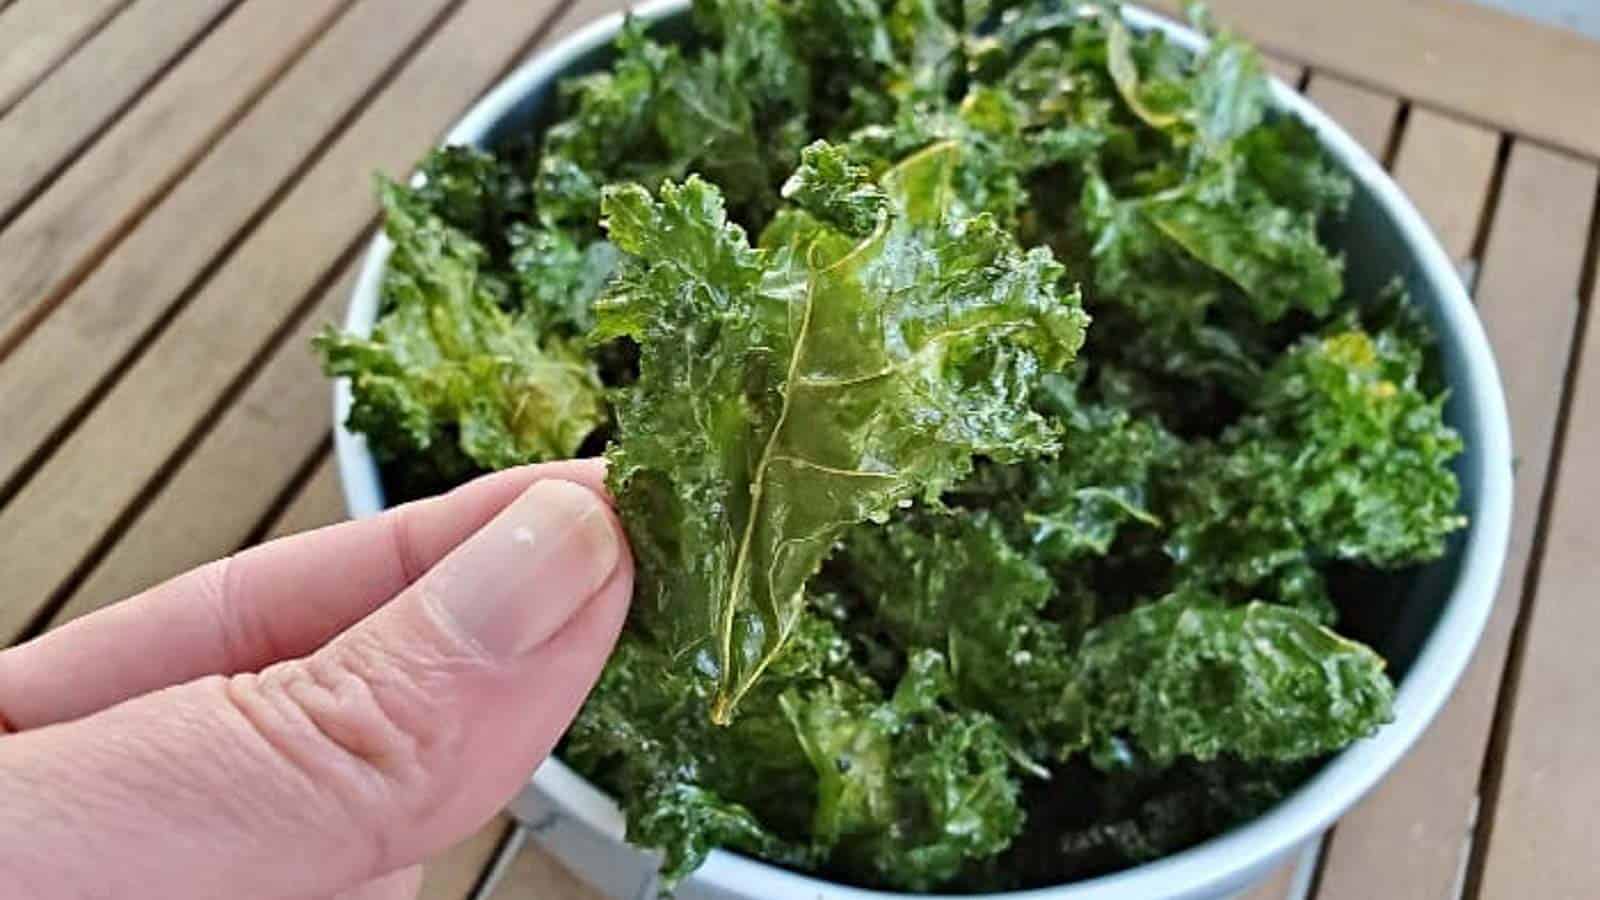 Image shows a hand holding a baked kale chip over a bowl filled with more kale chips.